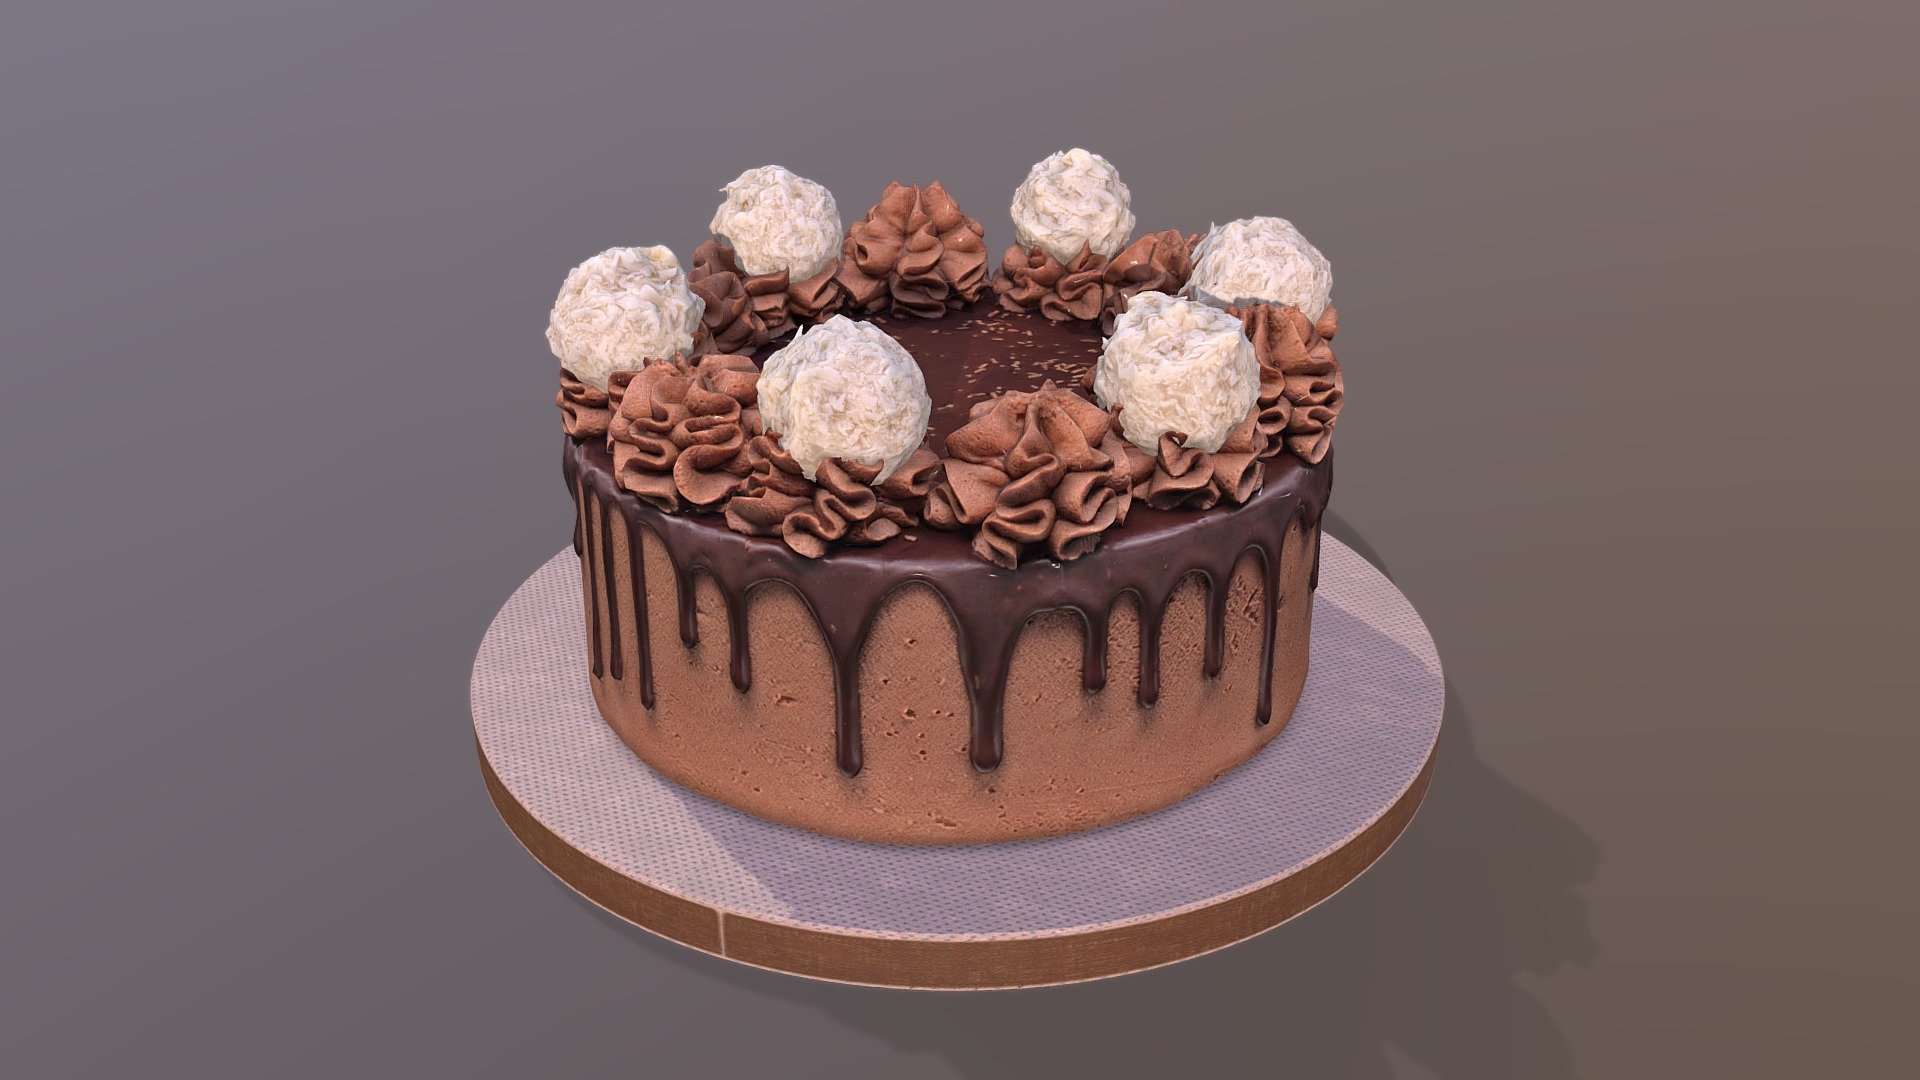 This premium Chocolate Ferrero Rafaello Drip Gateau Cake model was created using photogrammetry which is made by CAKESBURG Premium Cake Shop in the UK. You can purchase real cake from this link: https://cakesburg.co.uk/products/chocolate-heaven-cake?_pos=1&amp;_sid=25d1b3fb8&amp;_ss=r

Cake Texture 40964096px PBR photoscan-based materials (Base Color, Normal, Roughness, Specular)
Ferrero Rafaello Balls 20482048px PBR photoscan-based materials (Base Color, Normal, Roughness, Specular)
Cake Drum 4096*4096px PBR  (Base Color, Normal, Roughness, Specular) - Ferrero Rafaello Drip Gateau - Buy Royalty Free 3D model by Cakesburg Premium 3D Cake Shop (@Viscom_Cakesburg) 3d model